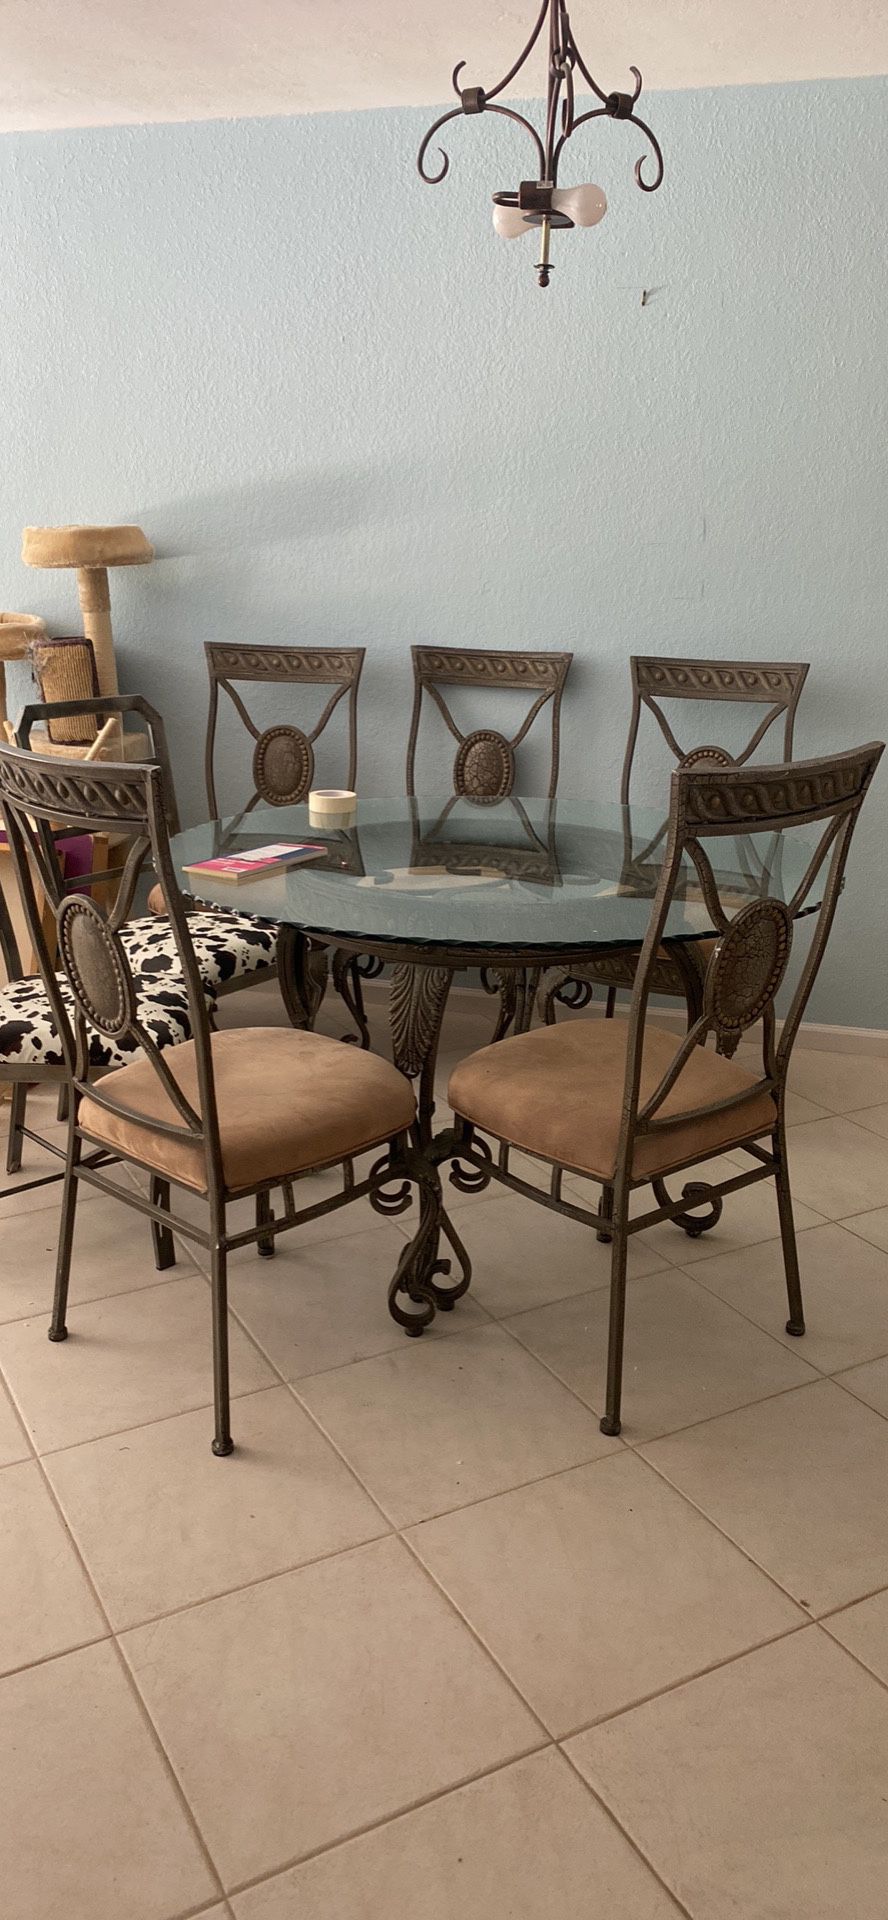 Brand New Glass Table With 5 Chairs To Match